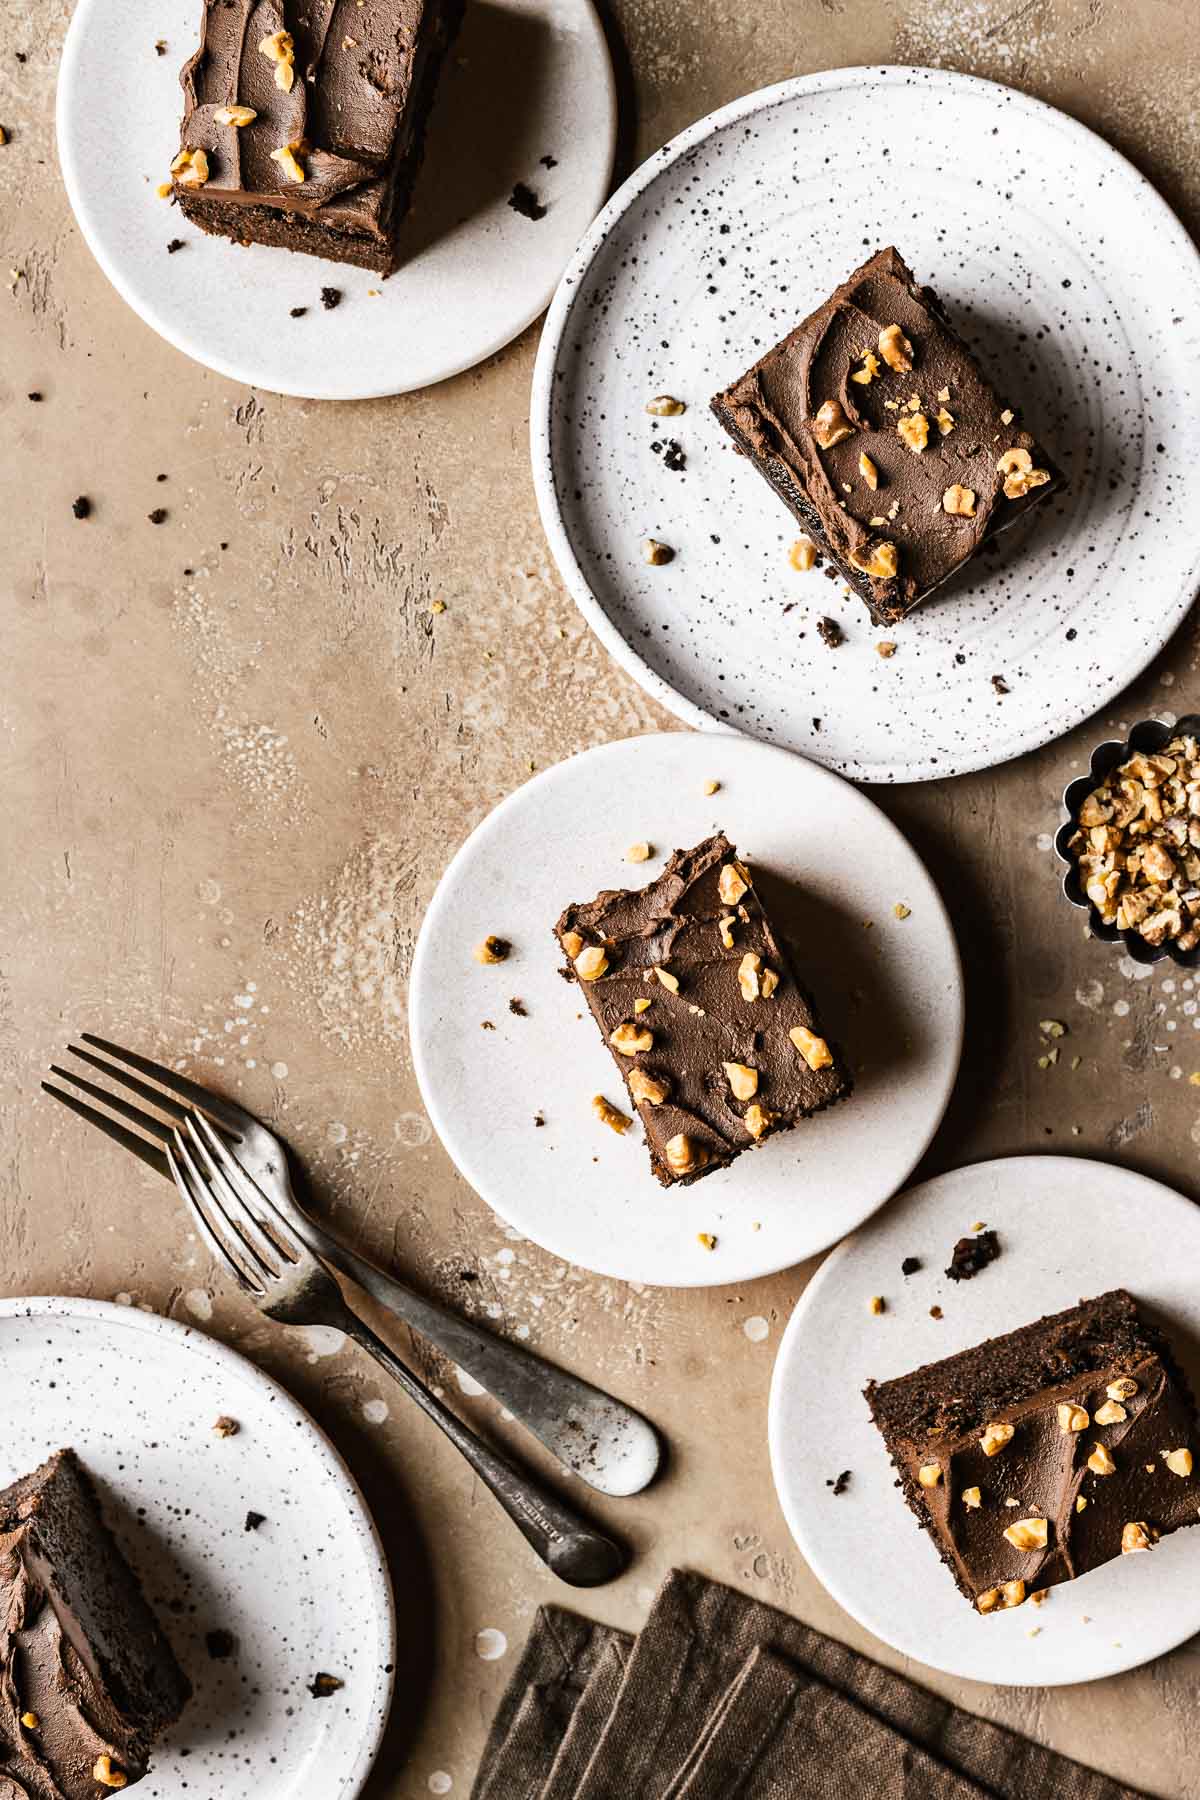 Five slices of chocolate walnut cake on ceramic plates with forks and a brown napkin nearby.